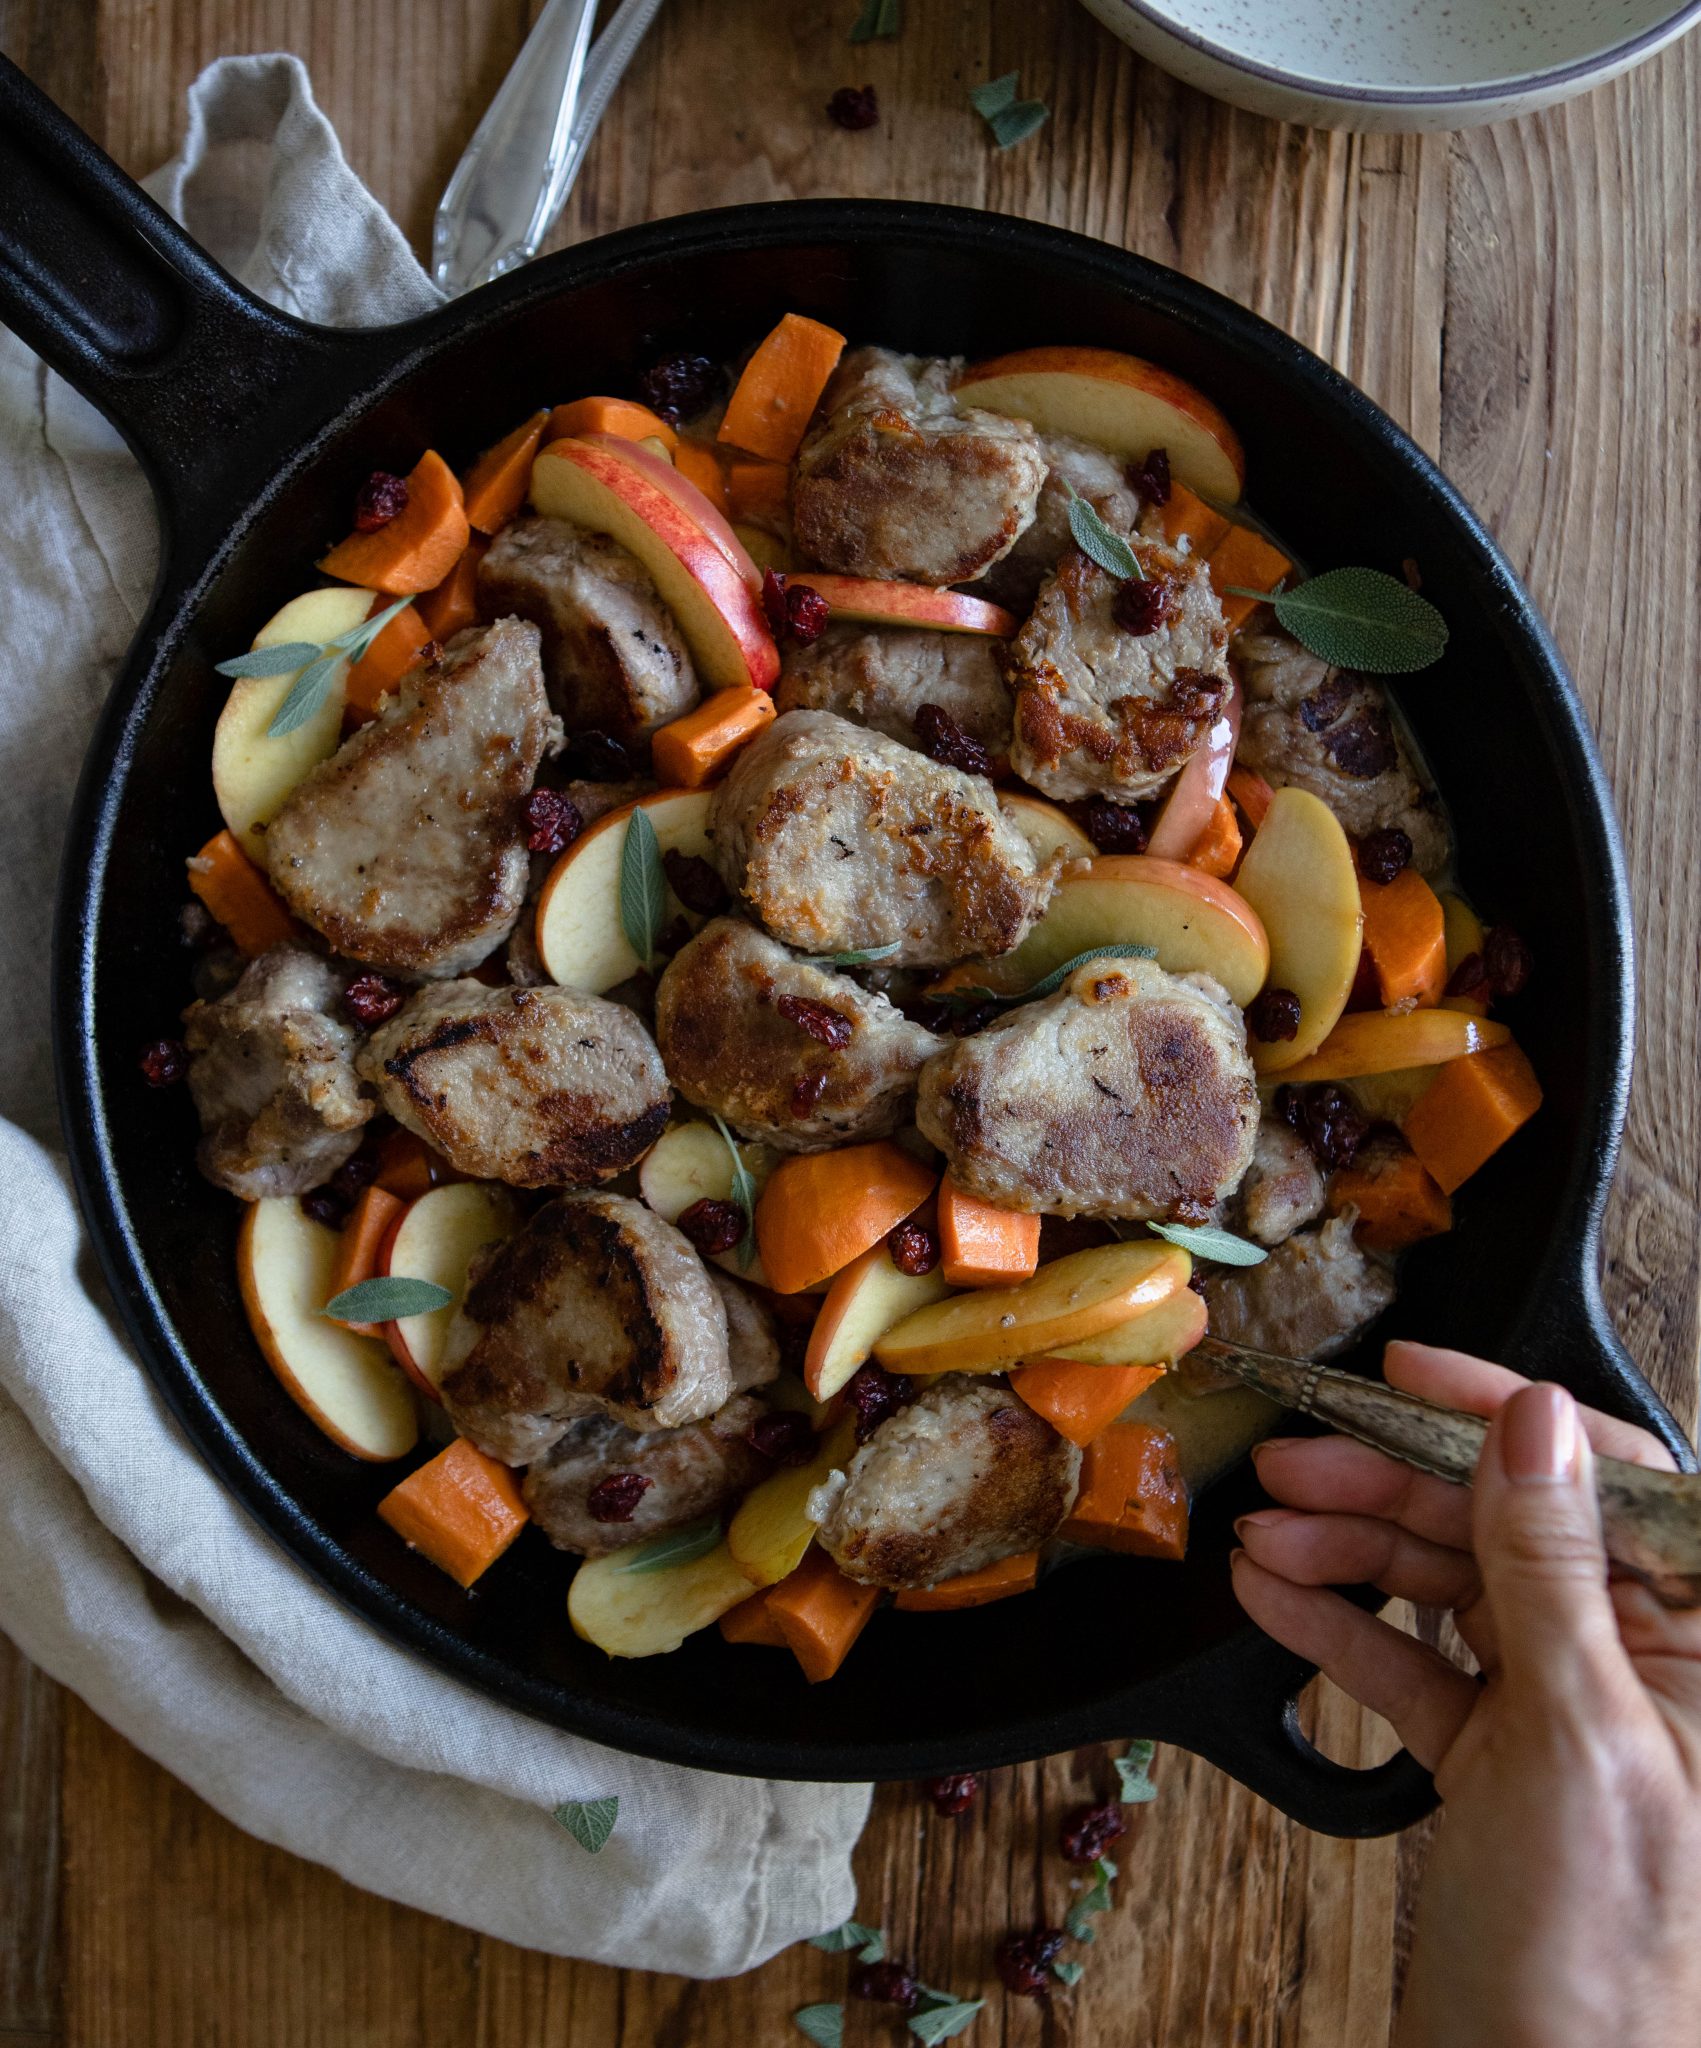 Woman's hand holding a spoon to serve a pork tenderloin dish out of a cast iron skillet